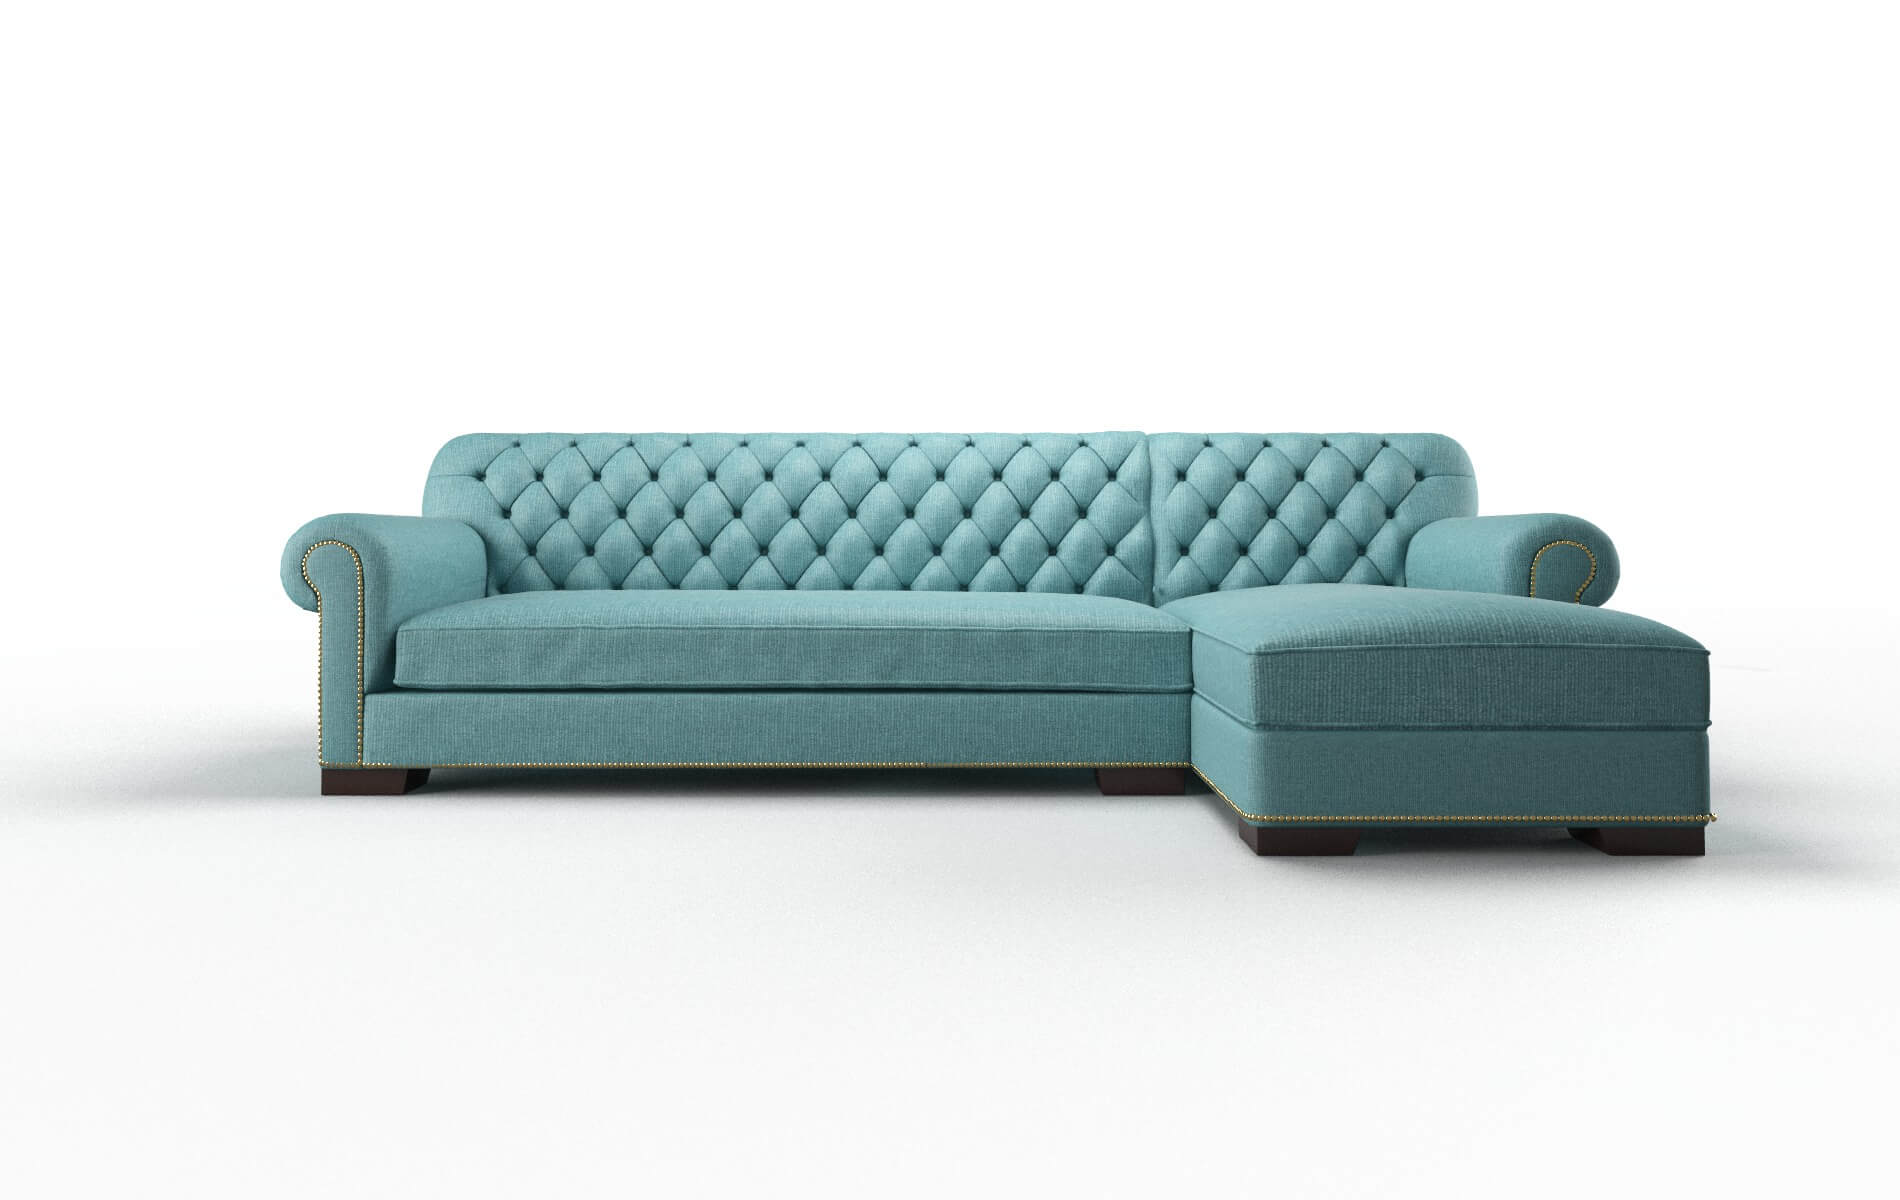 Chester Parker Turquoise chair espresso legs